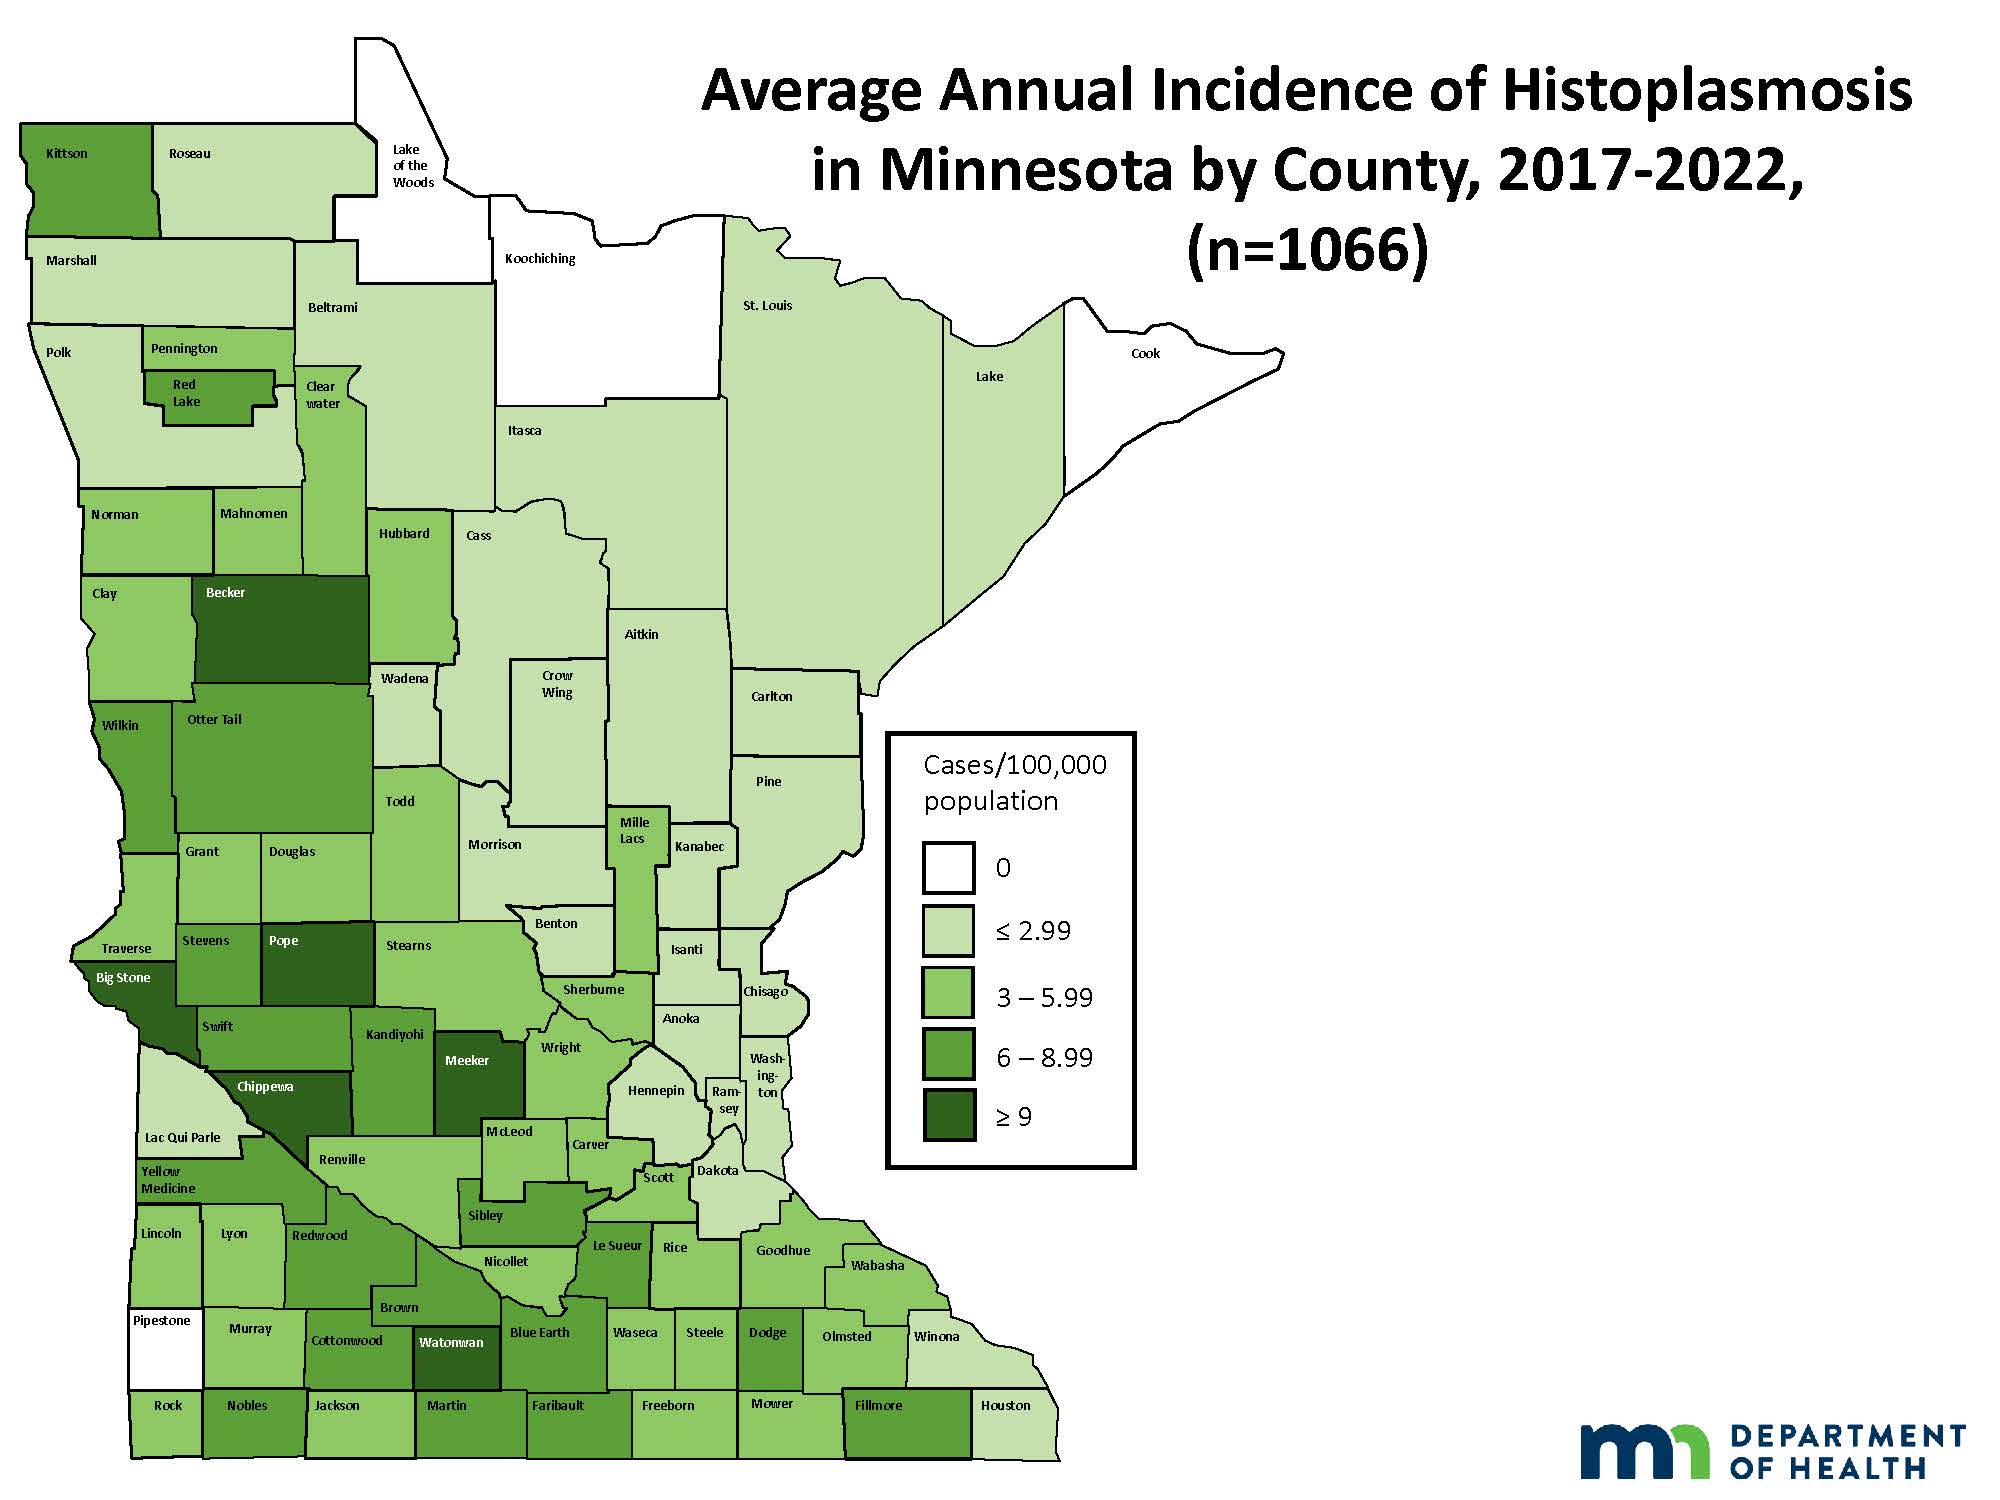 Thumbnail of map of Minnesota showing average annual incidence of Histoplasmosis, 2017-2022